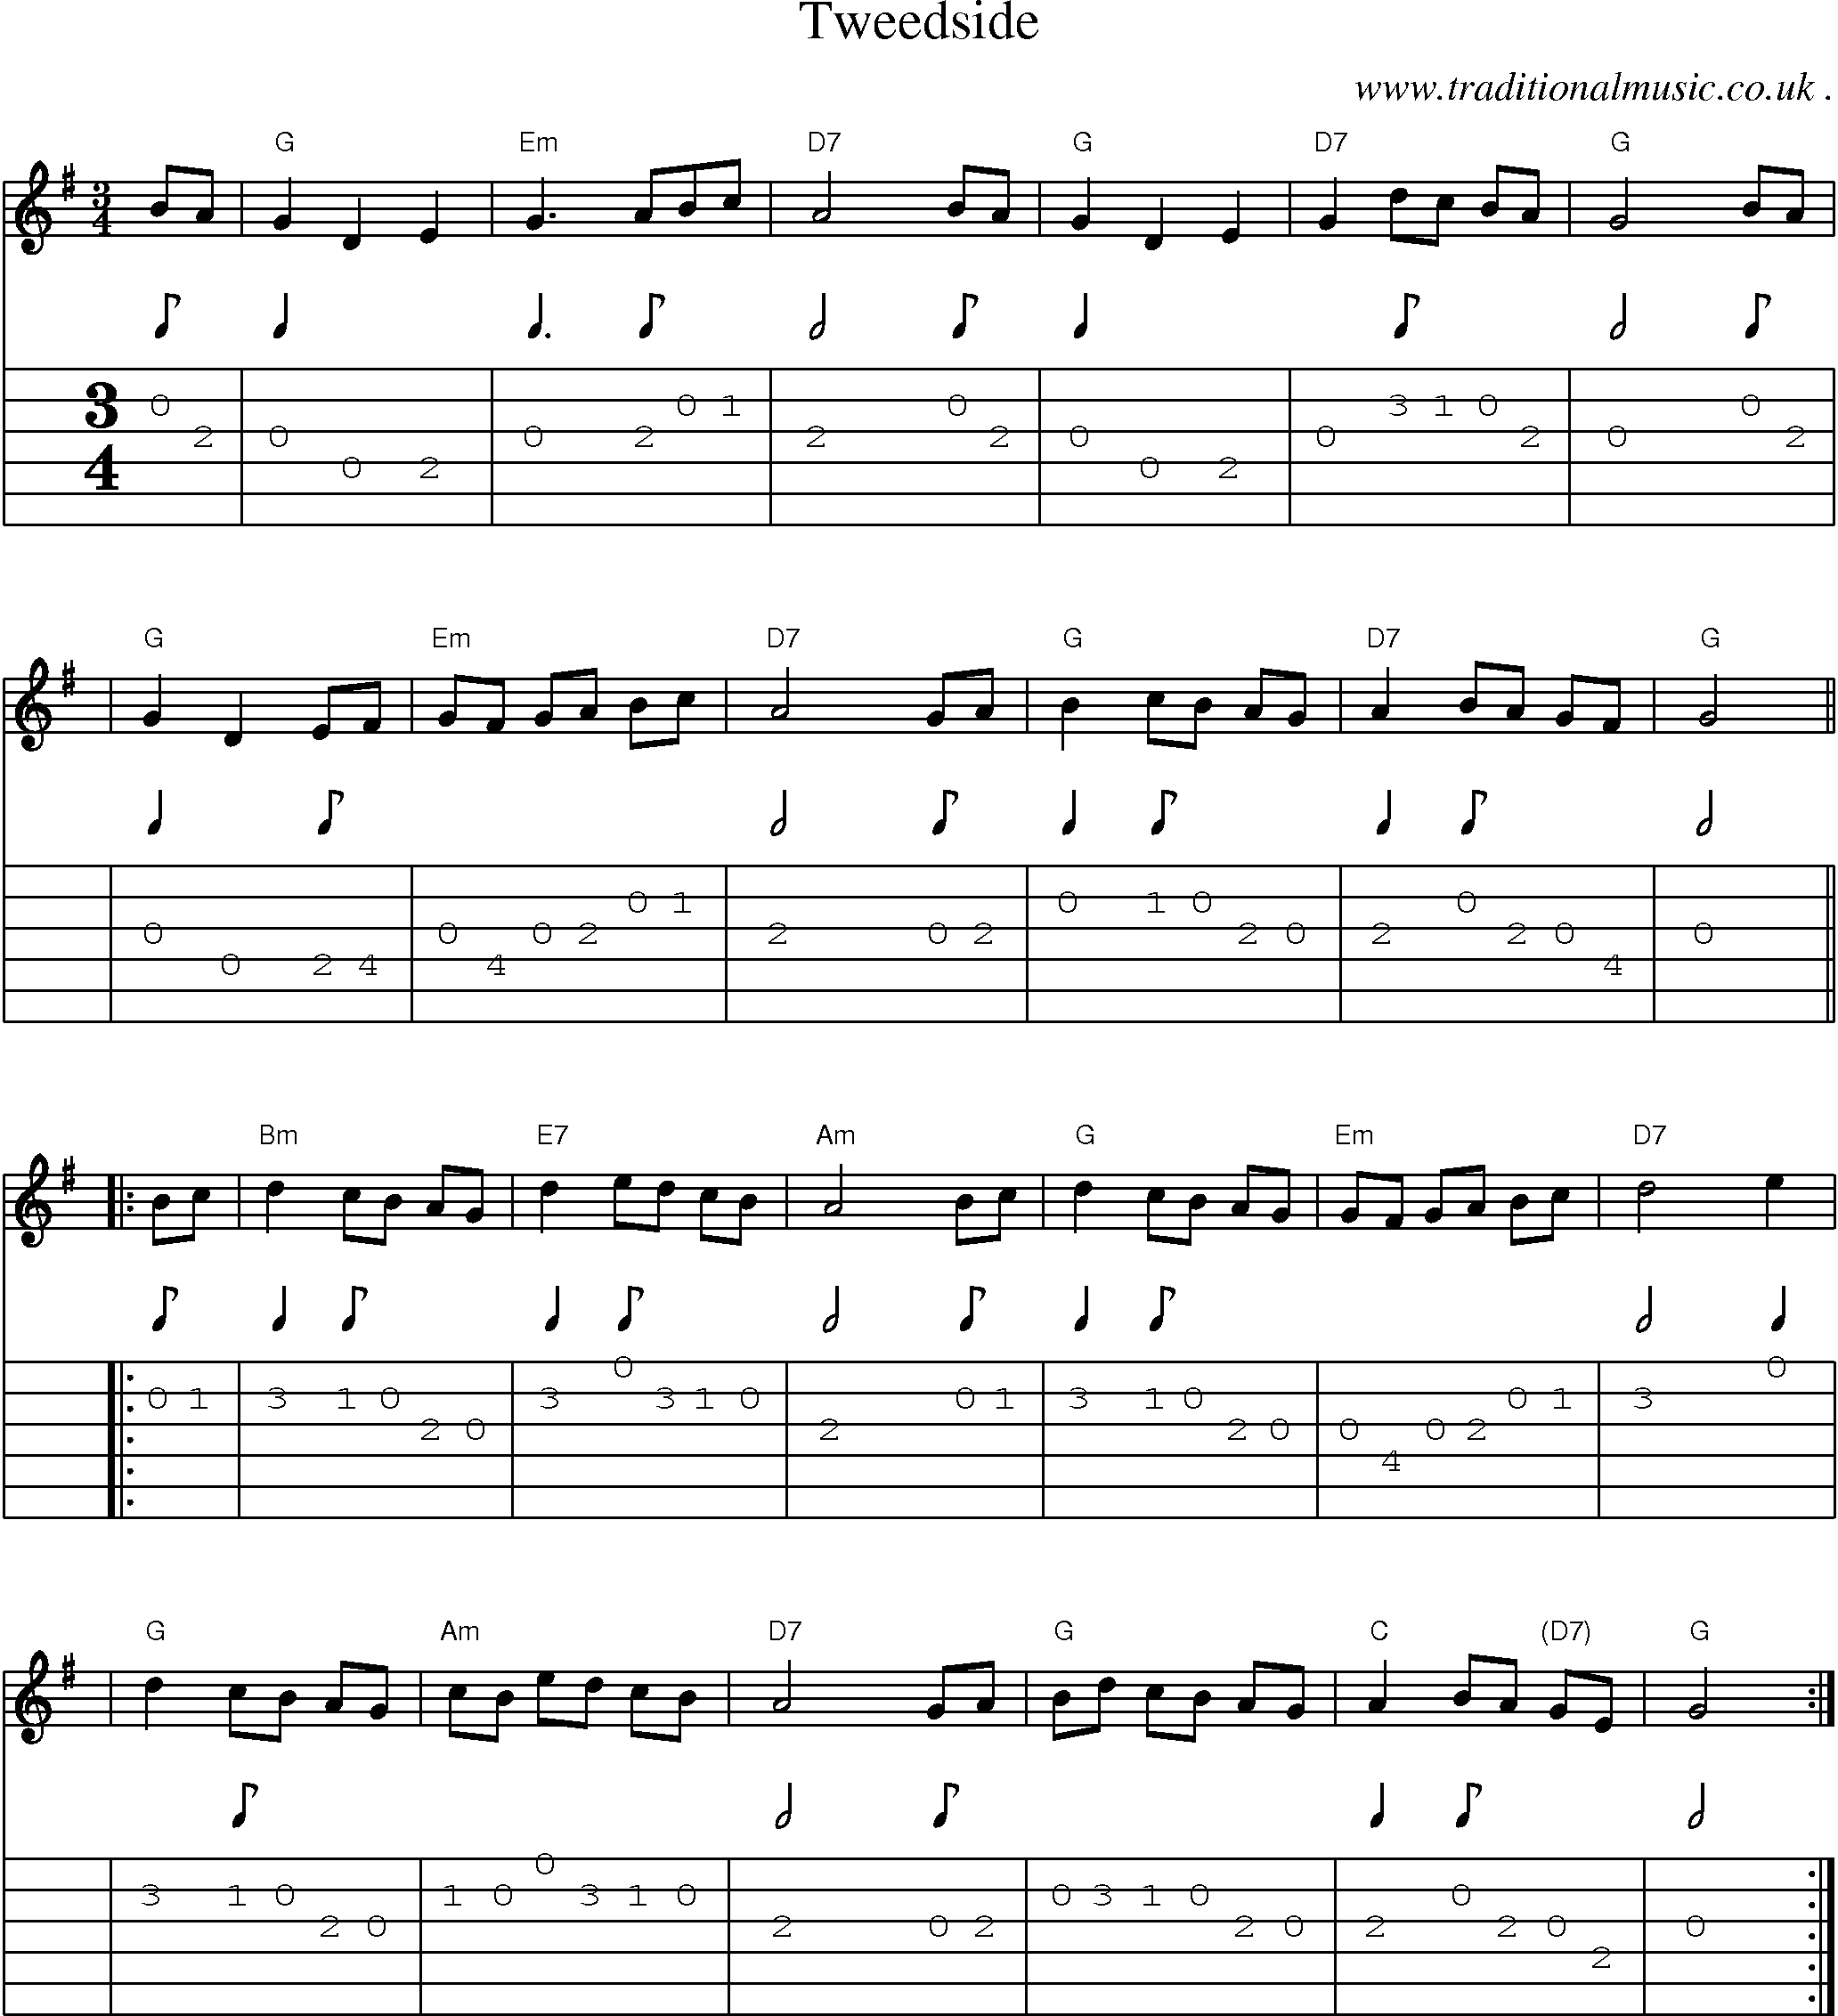 Sheet-music  score, Chords and Guitar Tabs for Tweedside